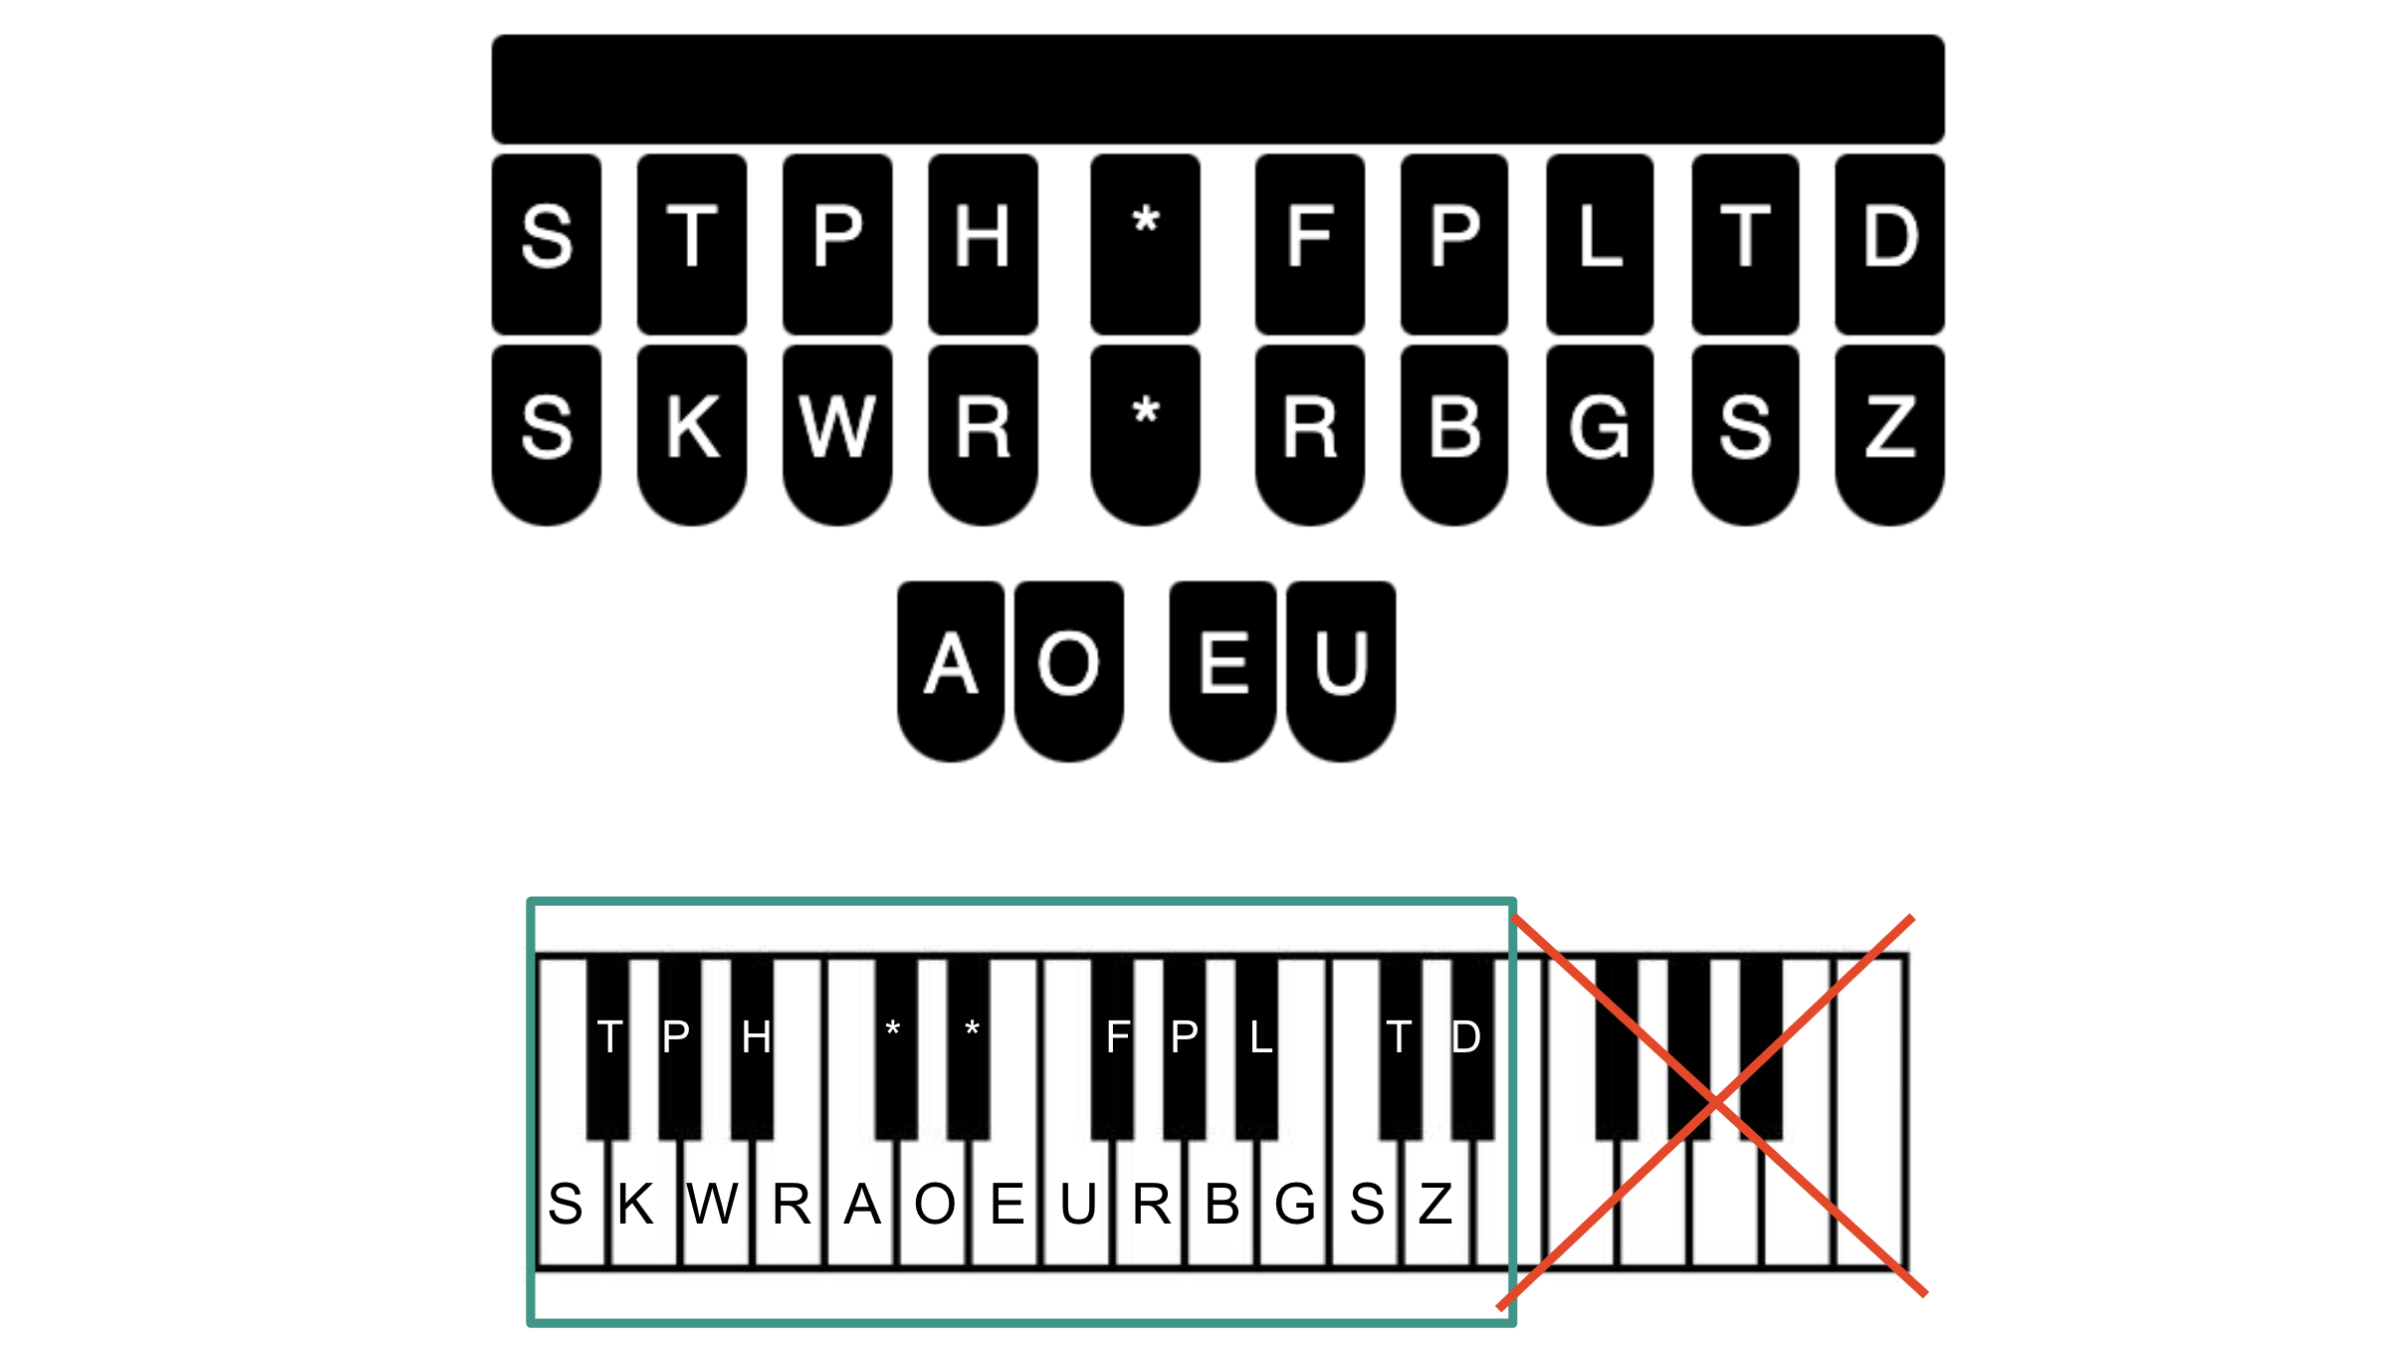 Diagram showing the key layout of the musical stenotype